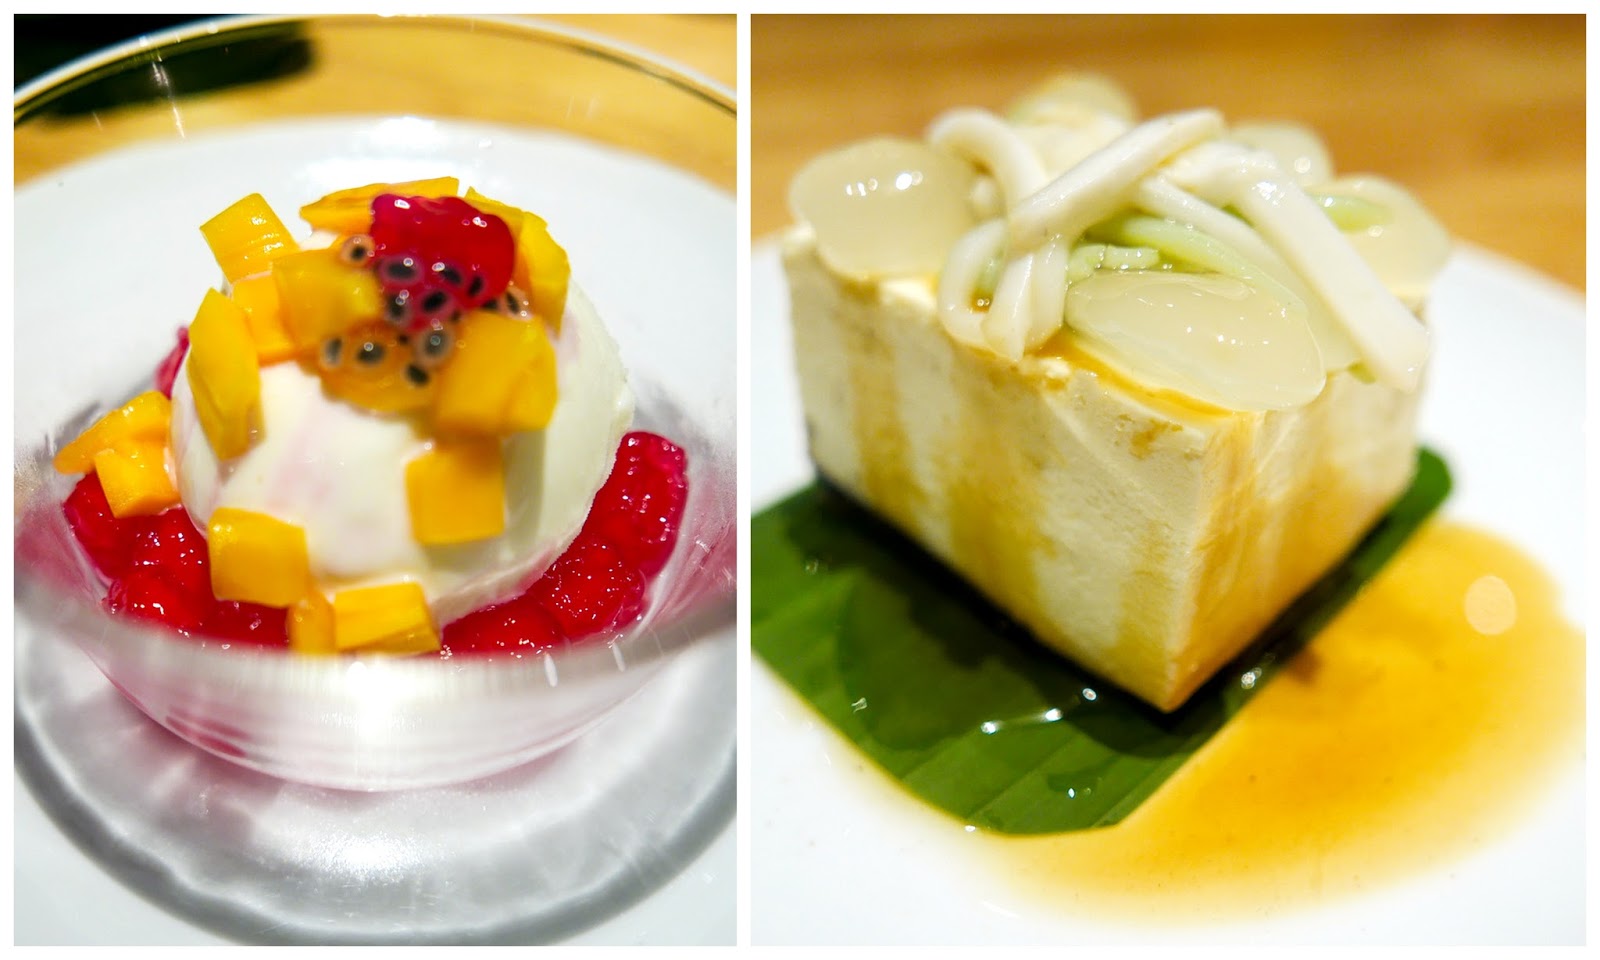 20. Kompassion II - red rubies with jackfruit and coconut gelato & cheesecake with coconut and cendol